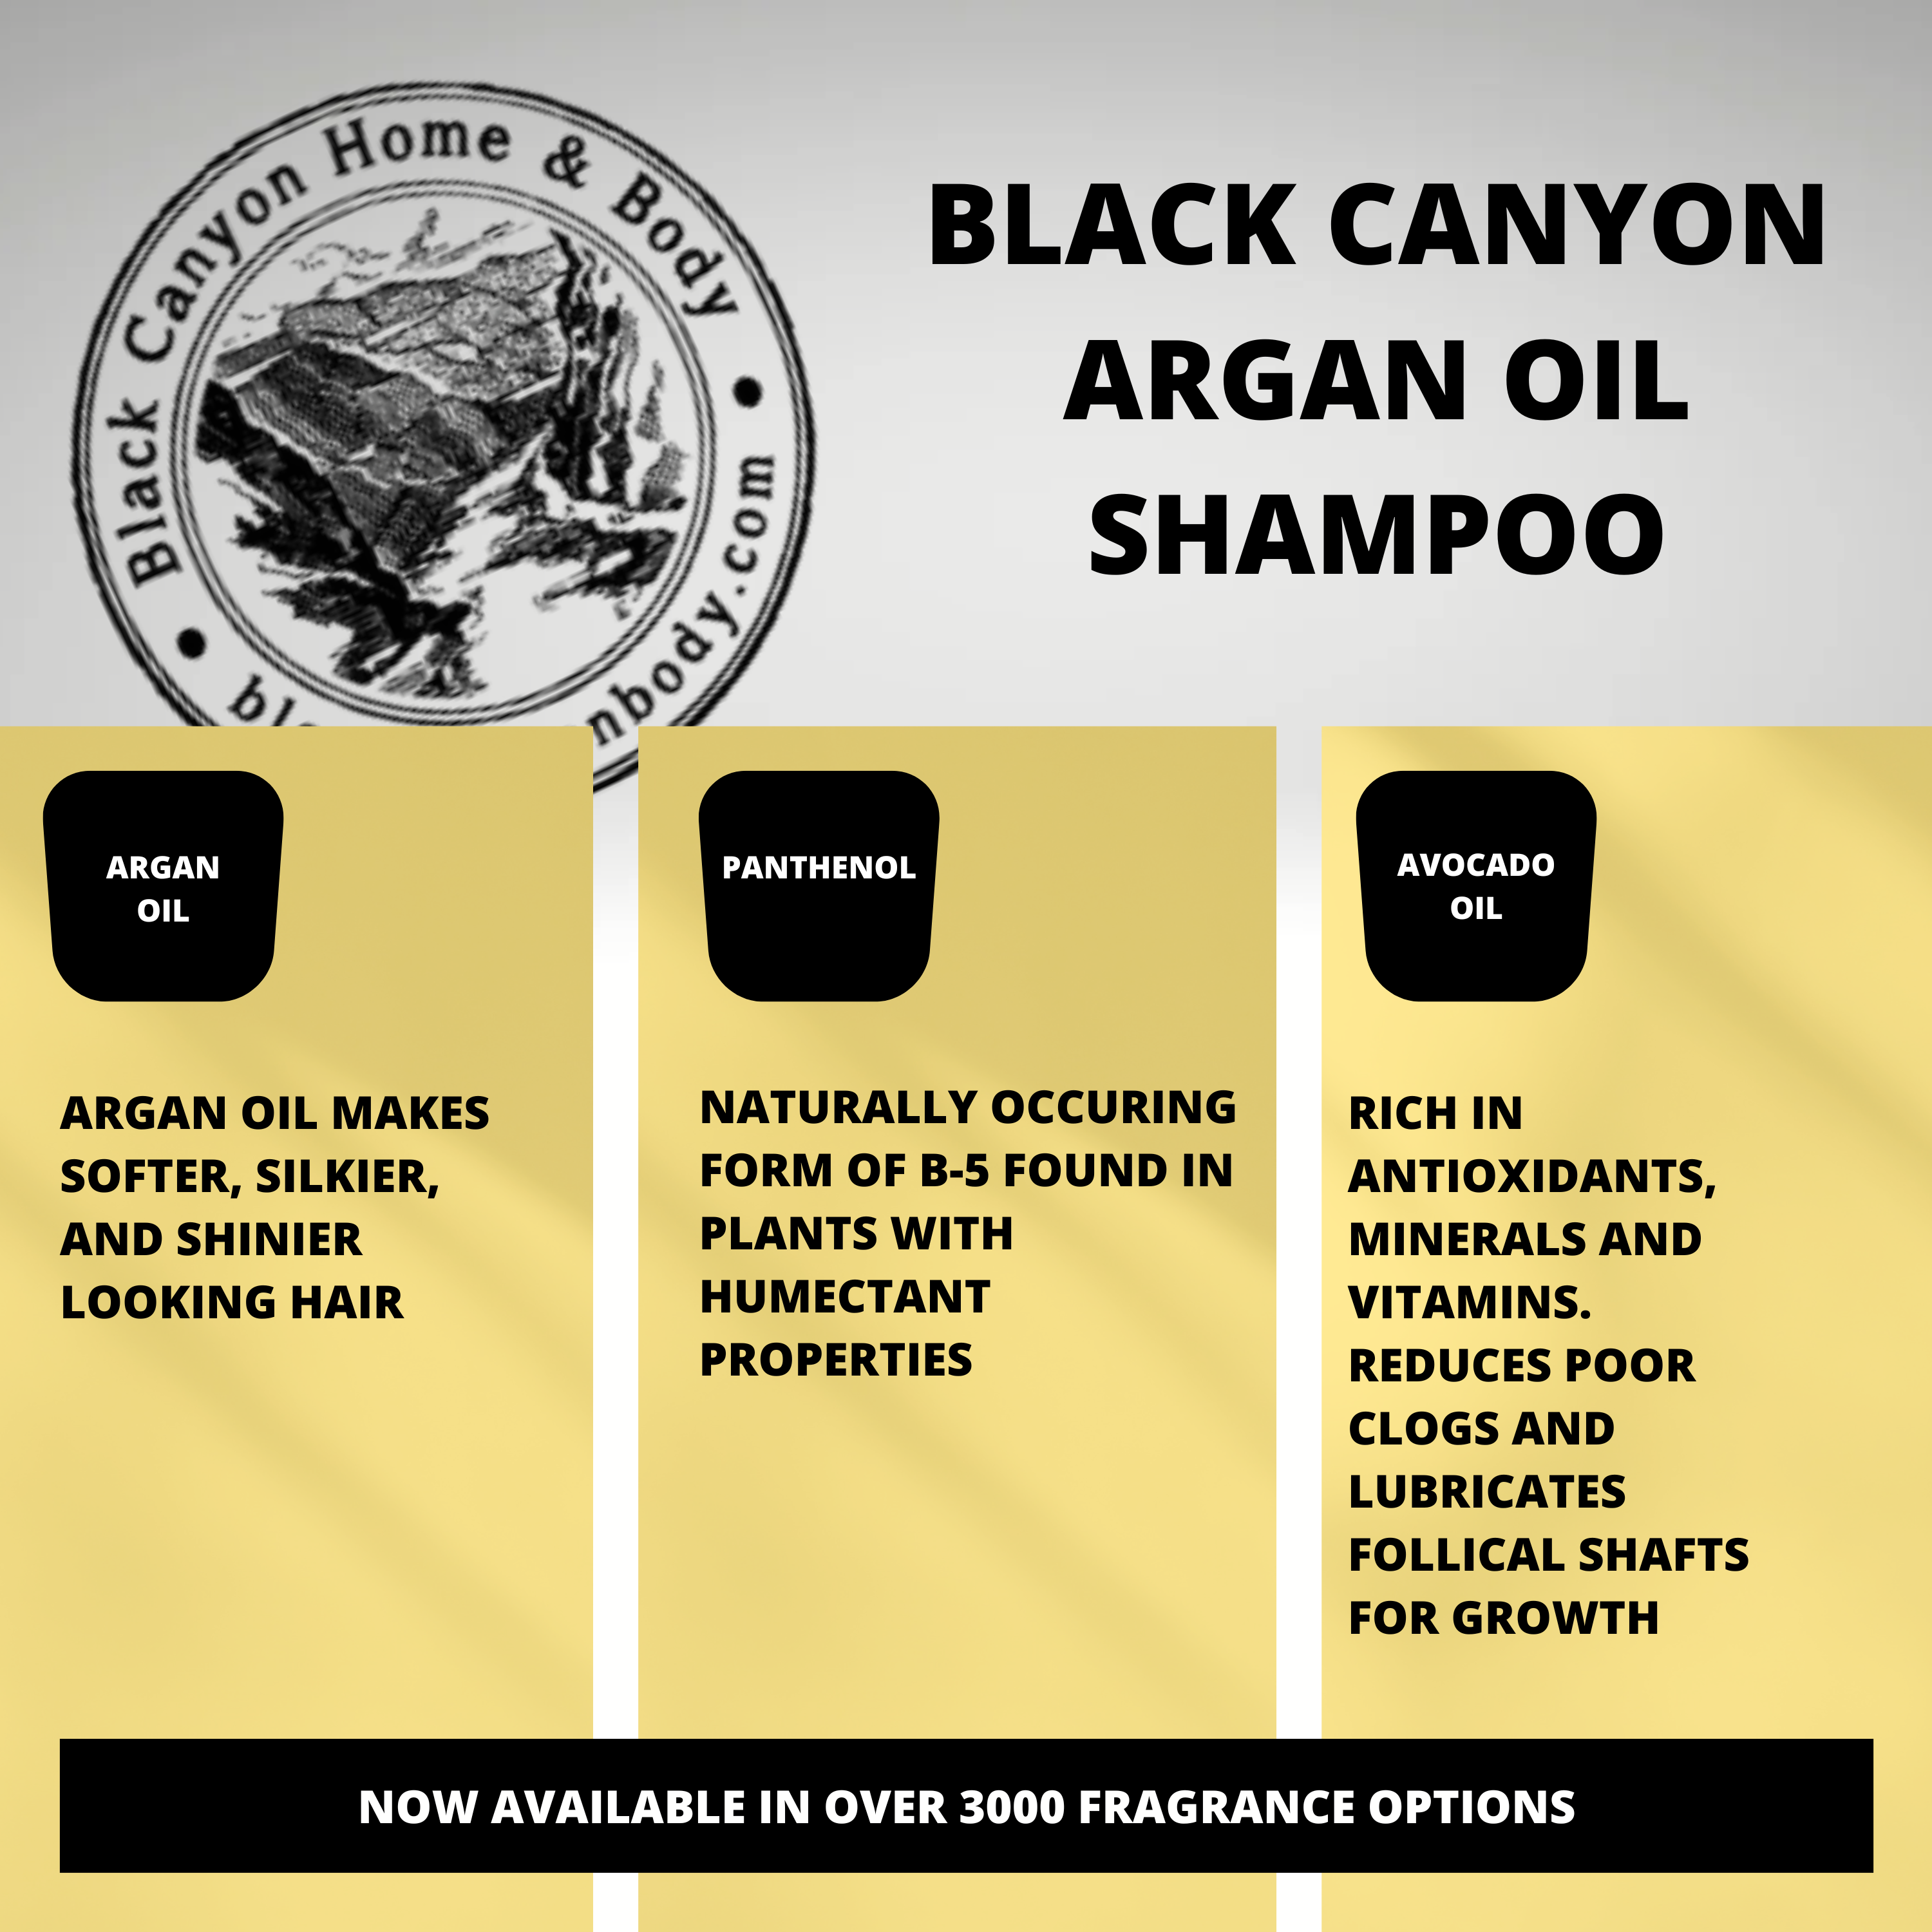 Black Canyon Altar Of Roses Scented Shampoo with Argan Oil